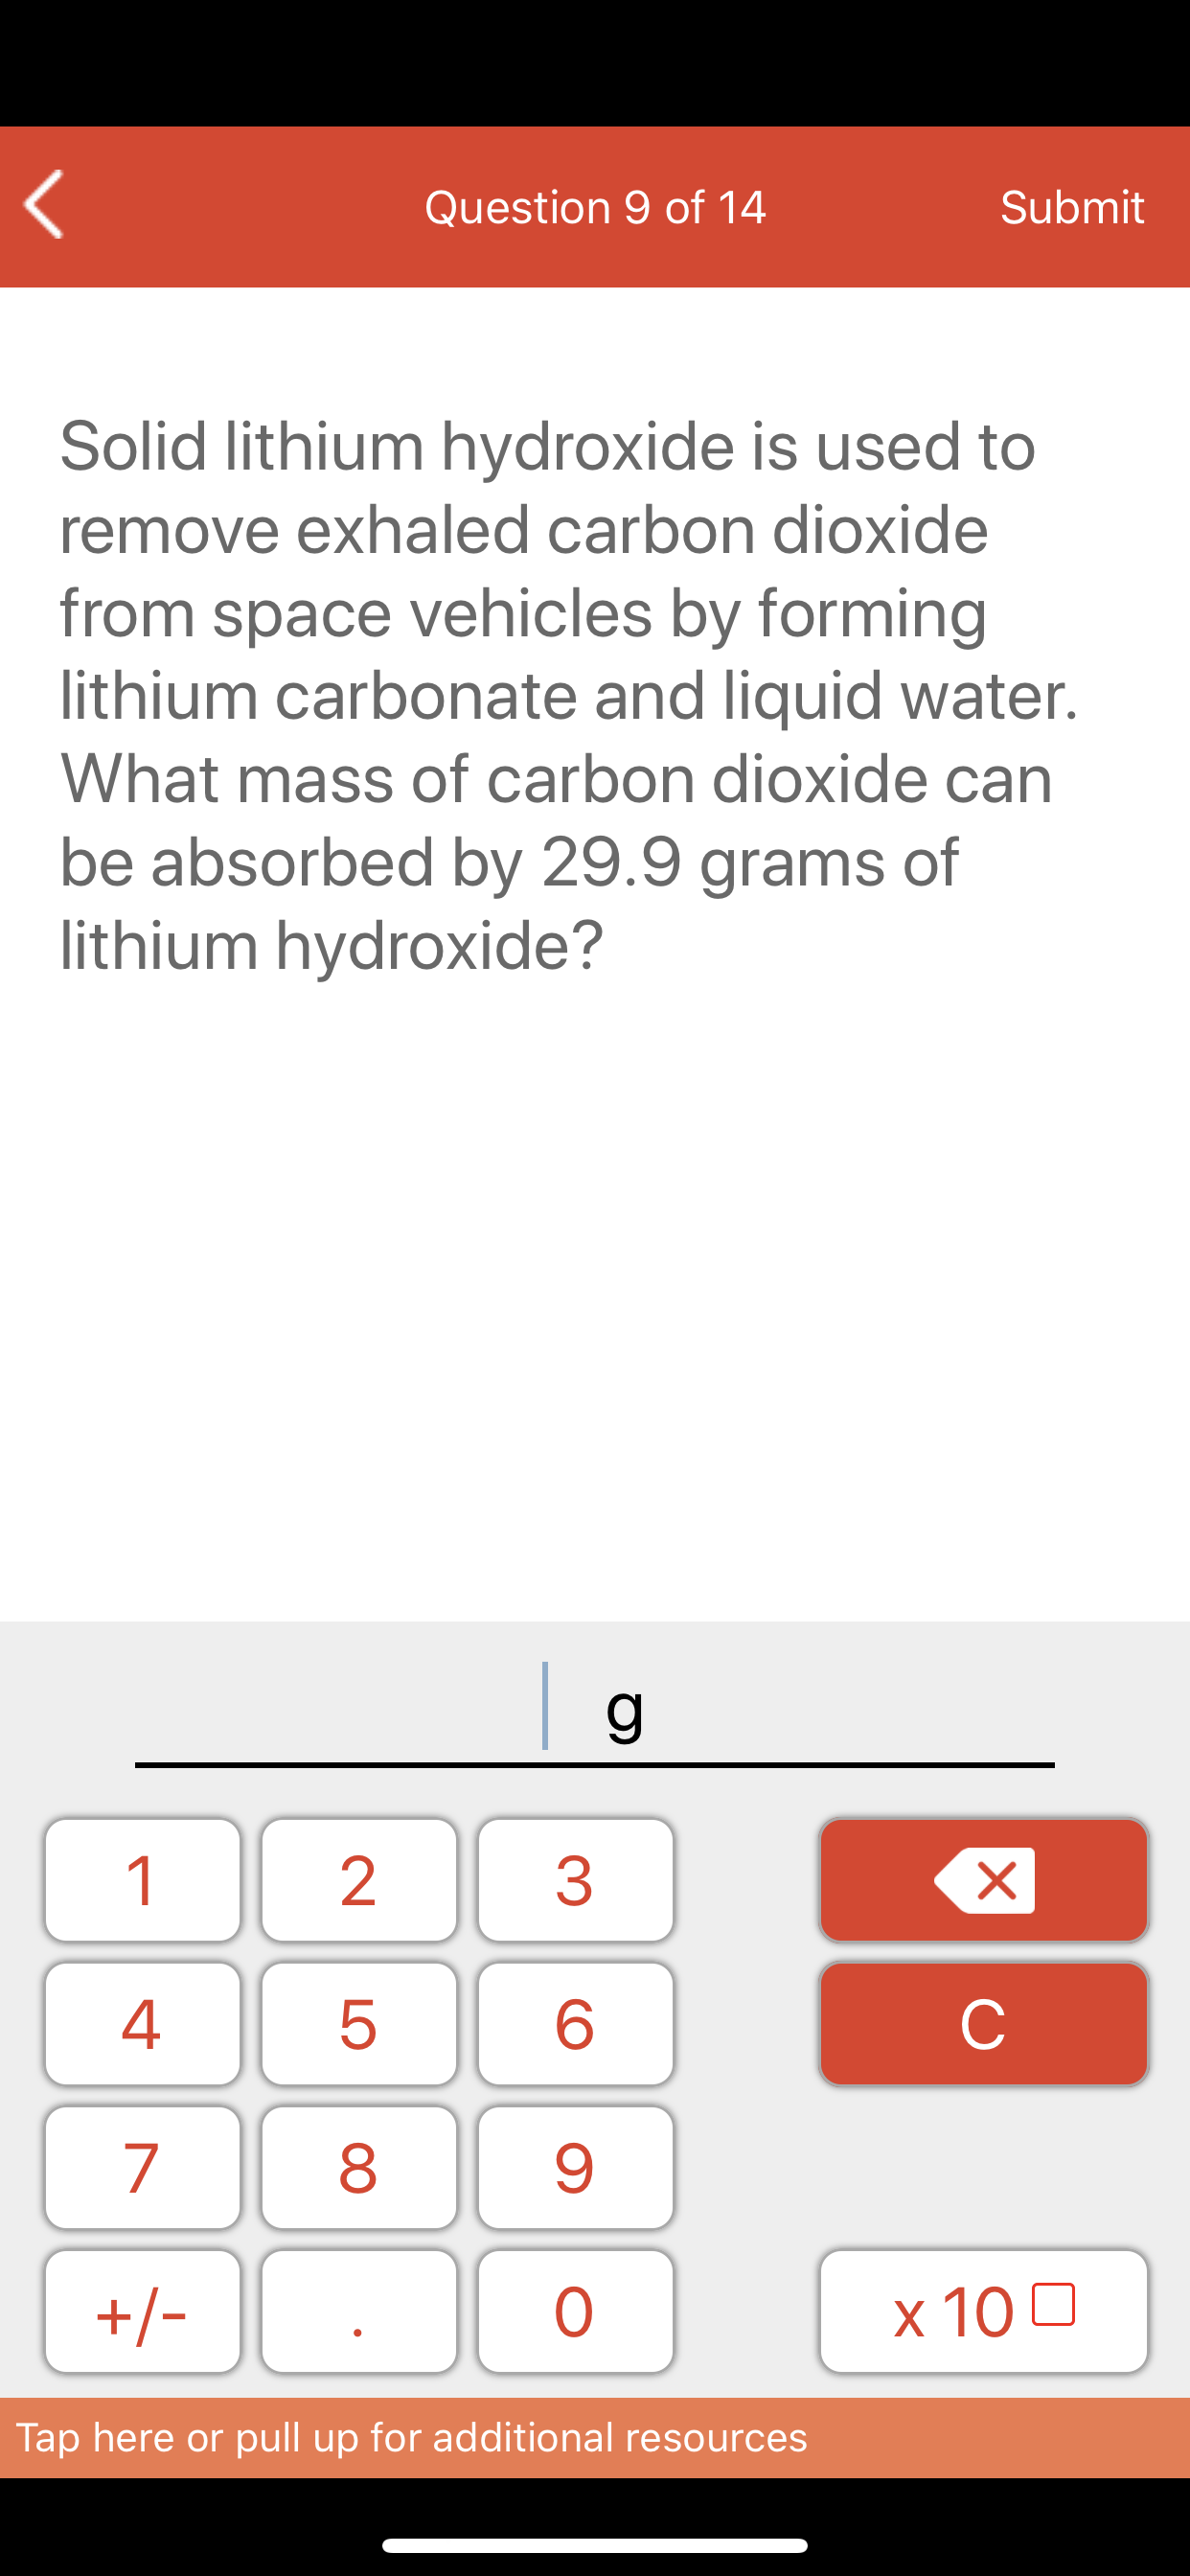 Question 9 of 14
Submit
Solid lithium hydroxide is used to
remove exhaled carbon dioxide
from space vehicles by forming
lithium carbonate and liquid water.
What mass of carbon dioxide can
be absorbed by 29.9 grams of
lithium hydroxide?
| g_
1
4
8
+/-
x 10 0
Tap here or pull up for additional resources
LO
